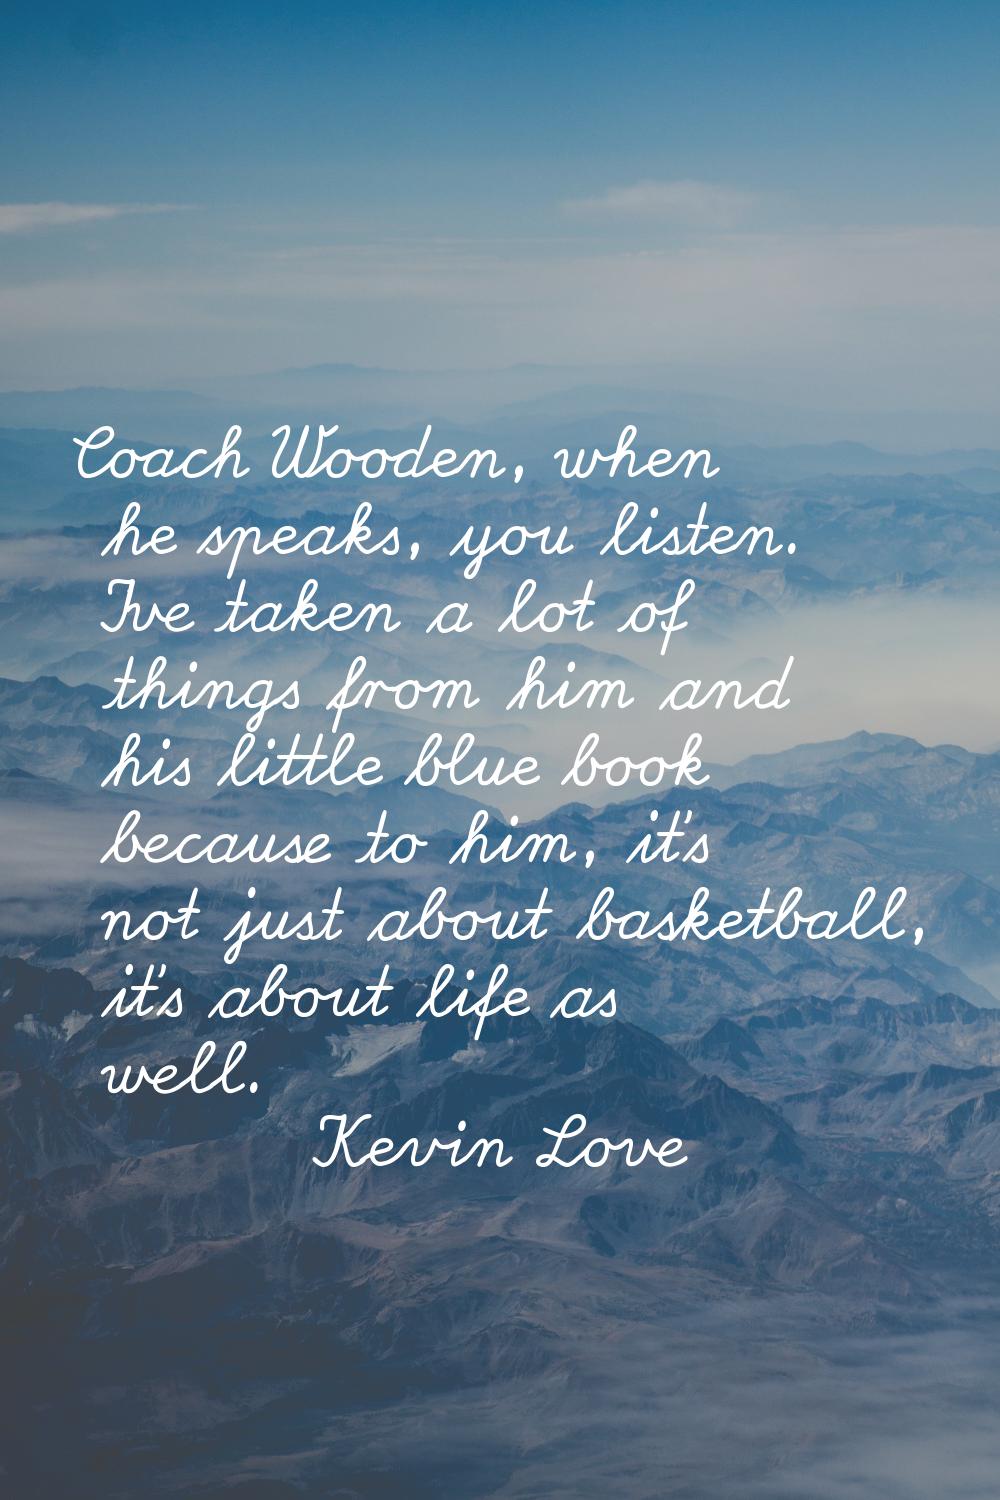 Coach Wooden, when he speaks, you listen. I've taken a lot of things from him and his little blue b